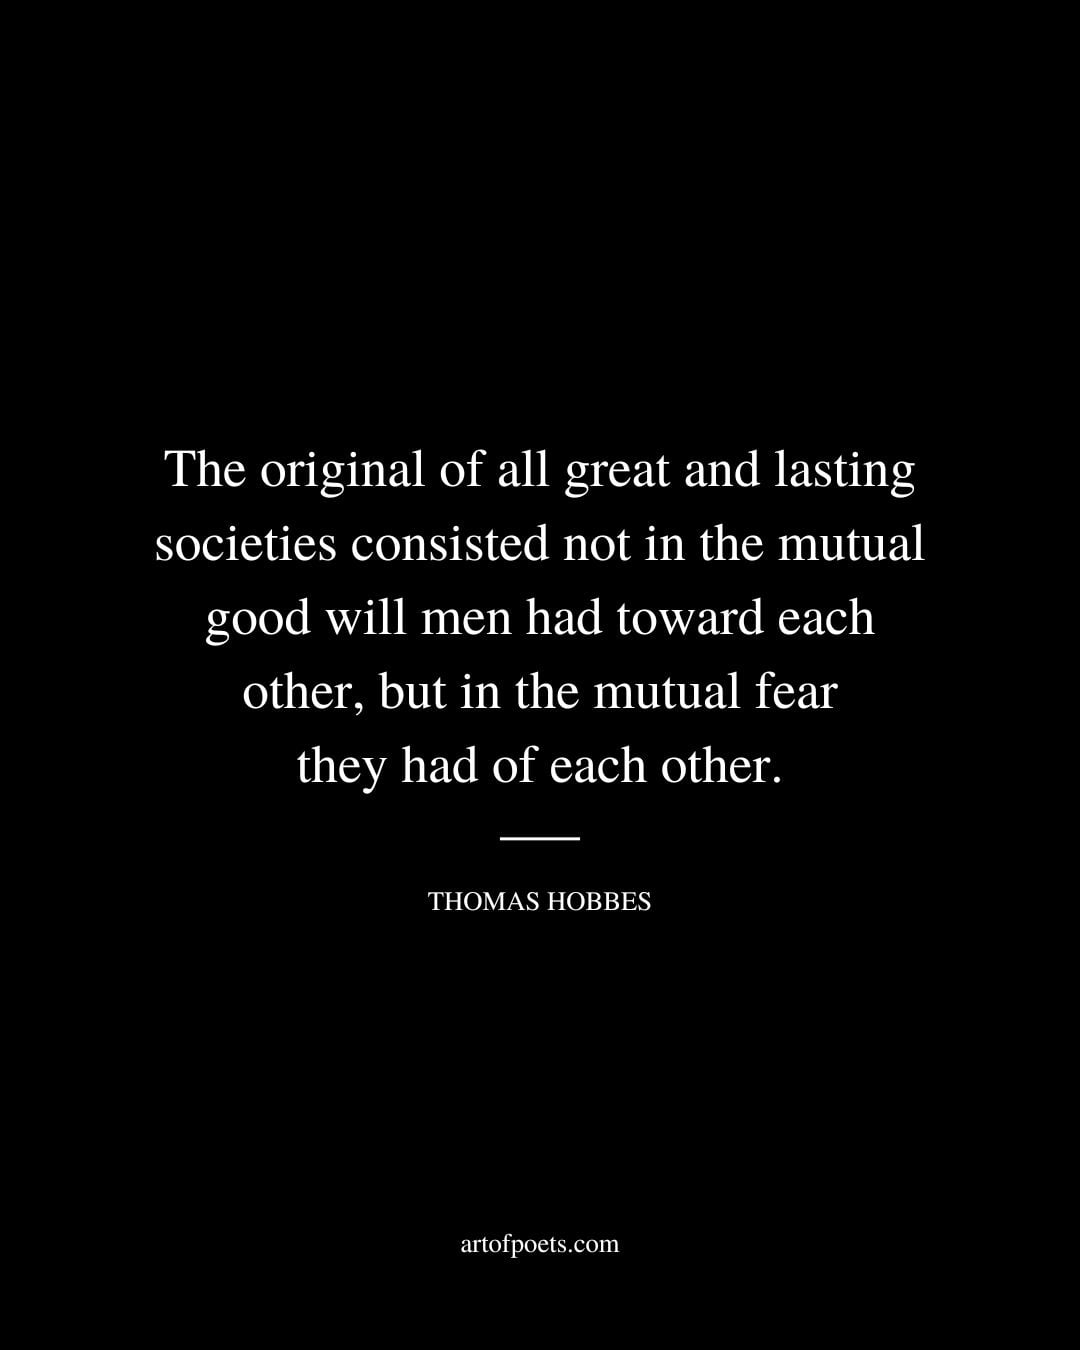 The original of all great and lasting societies consisted not in the mutual good will men had toward each other but in the mutual fear they had of each other